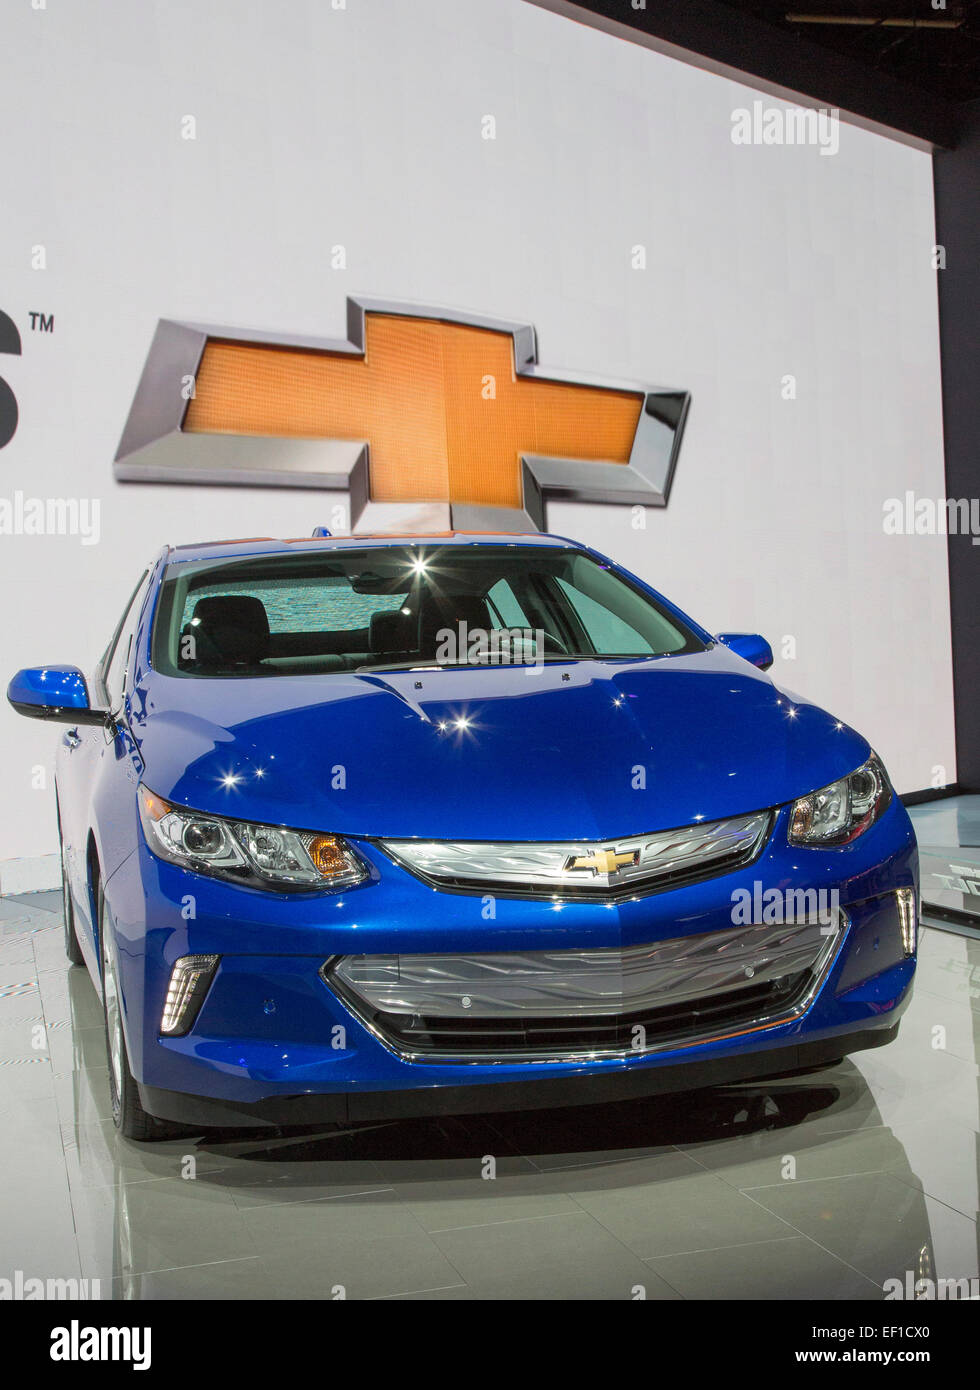 Detroit, Michigan - The 2016 Chevrolt Volt on display at the North American International Auto Show. Stock Photo